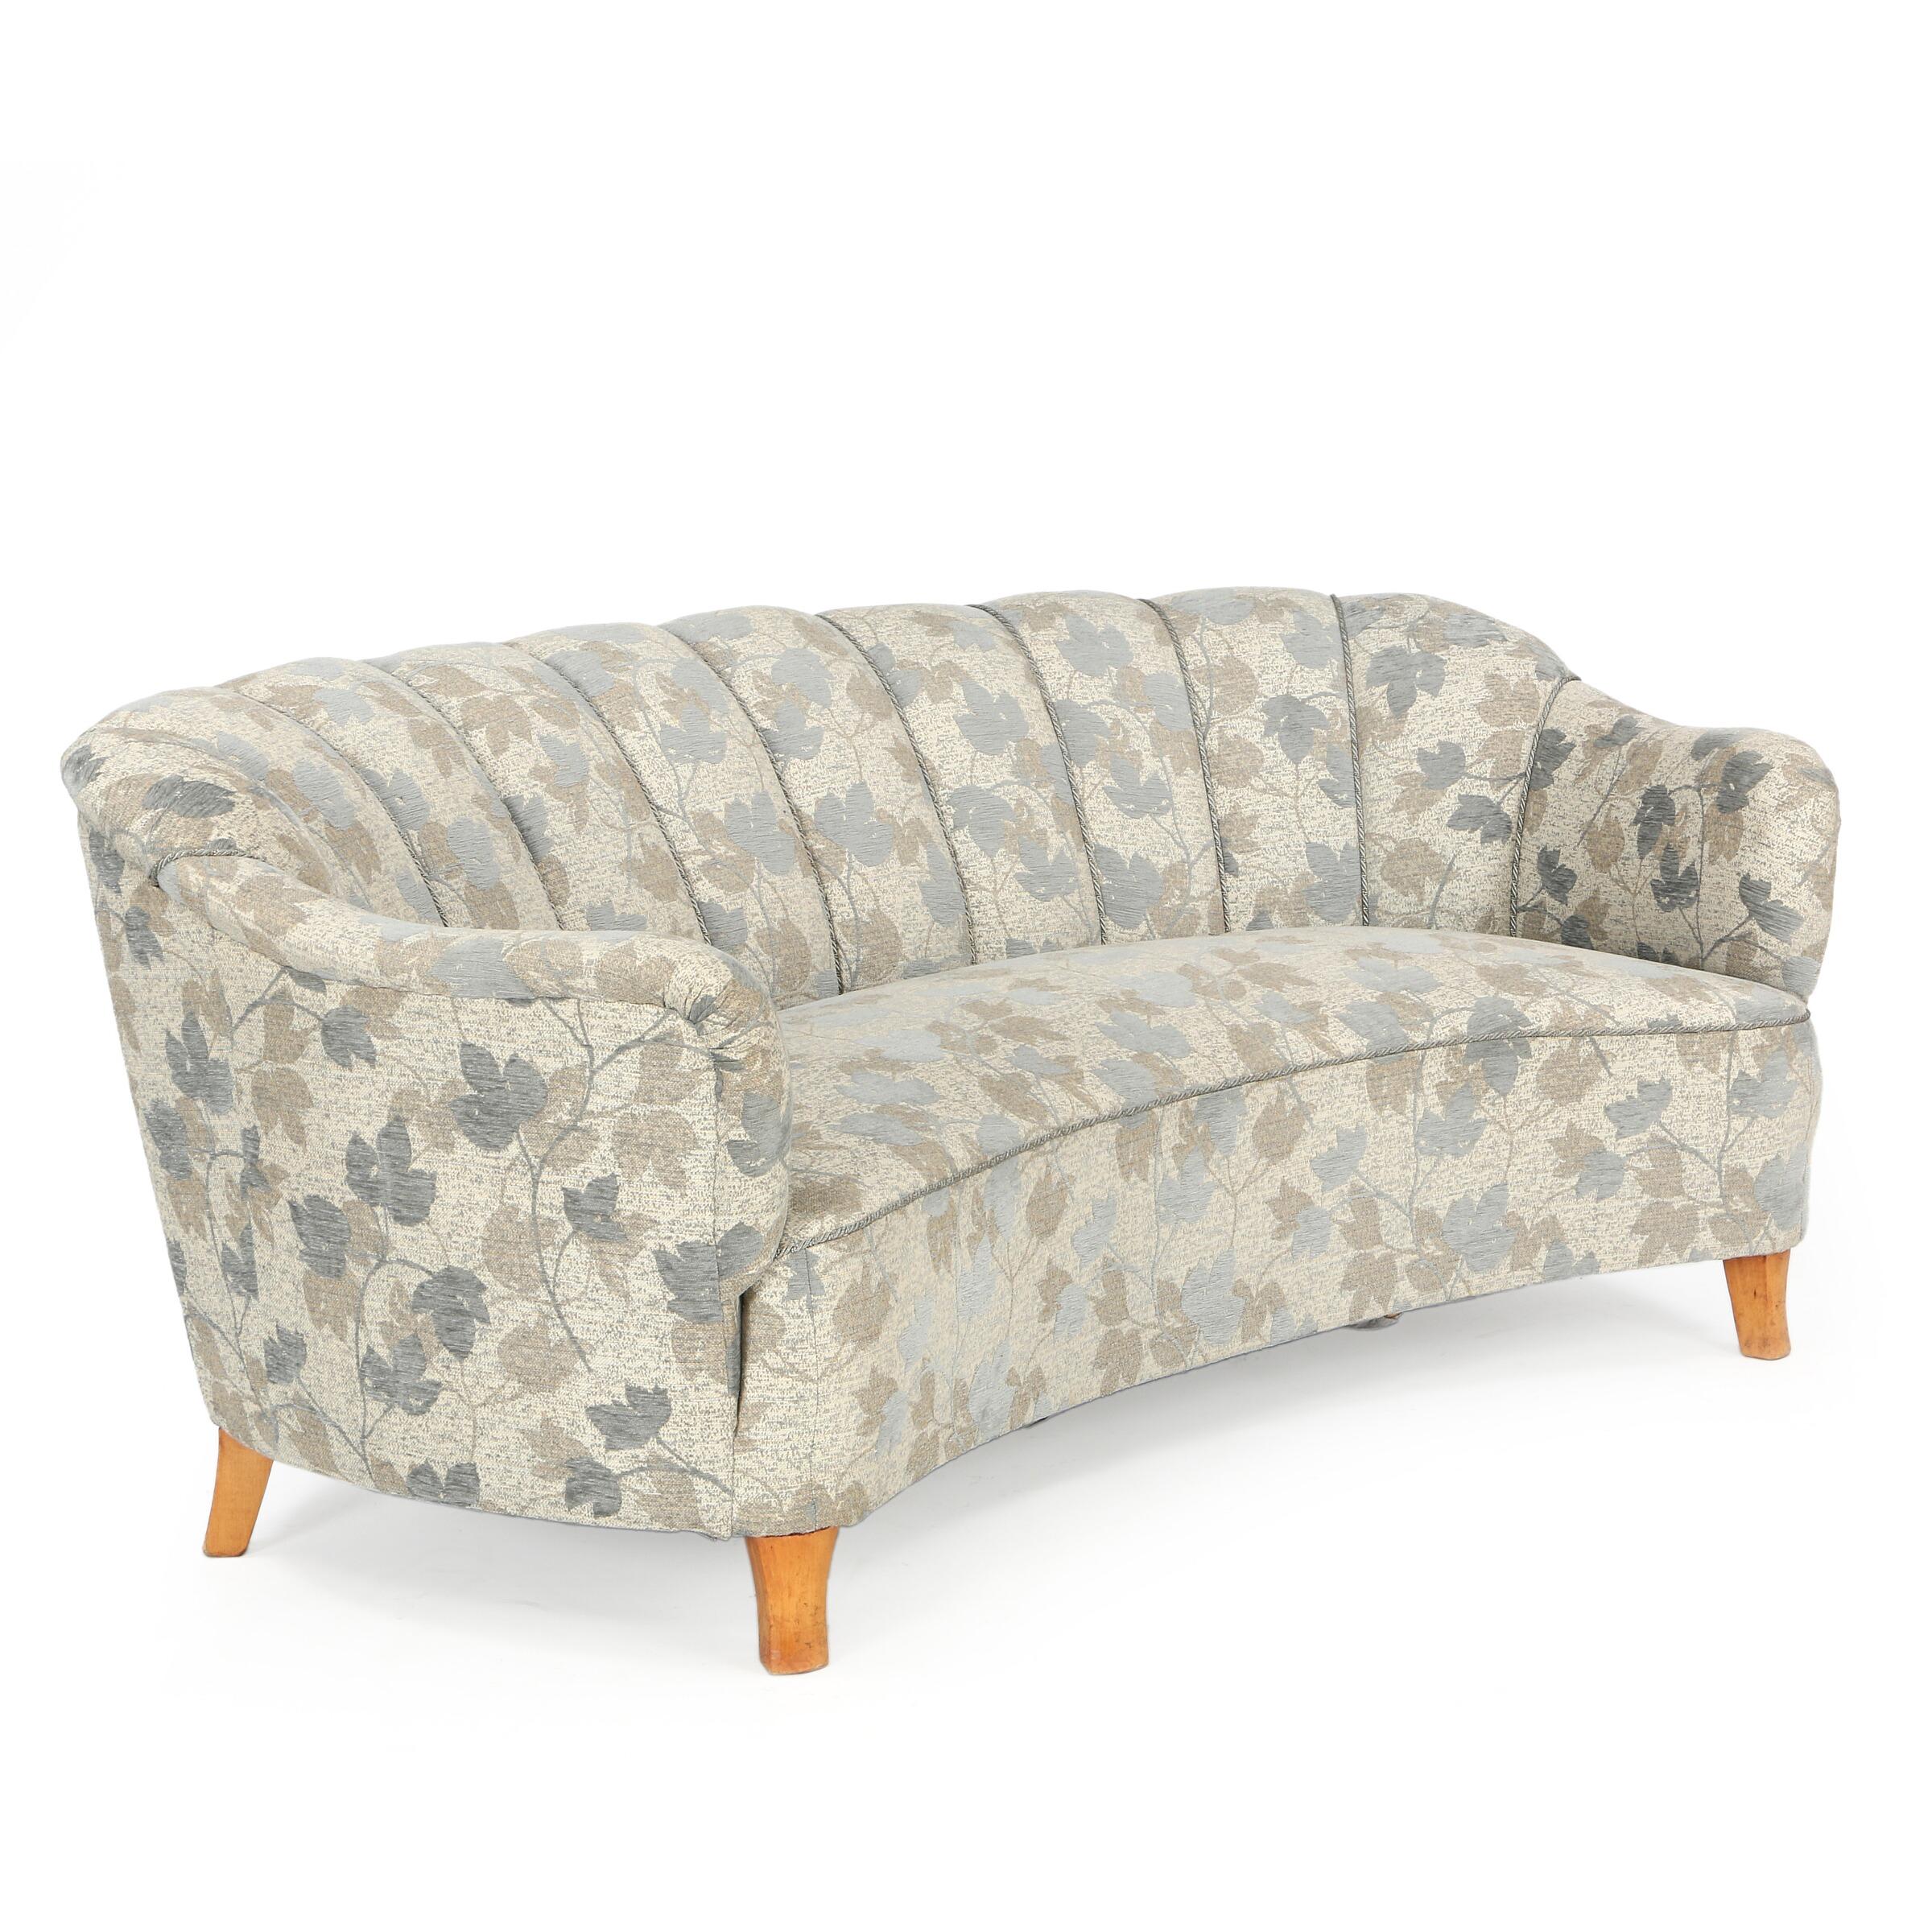 Swedish furniture design: Very comfortable and well built three-seat sofa with channelled back, legs of birch. Upholstered with flowered grey wool. Manufactured in 1940s–1950s. Measures: H 72 cm. L 188 cm. D 100 cm. There is a matching pair of